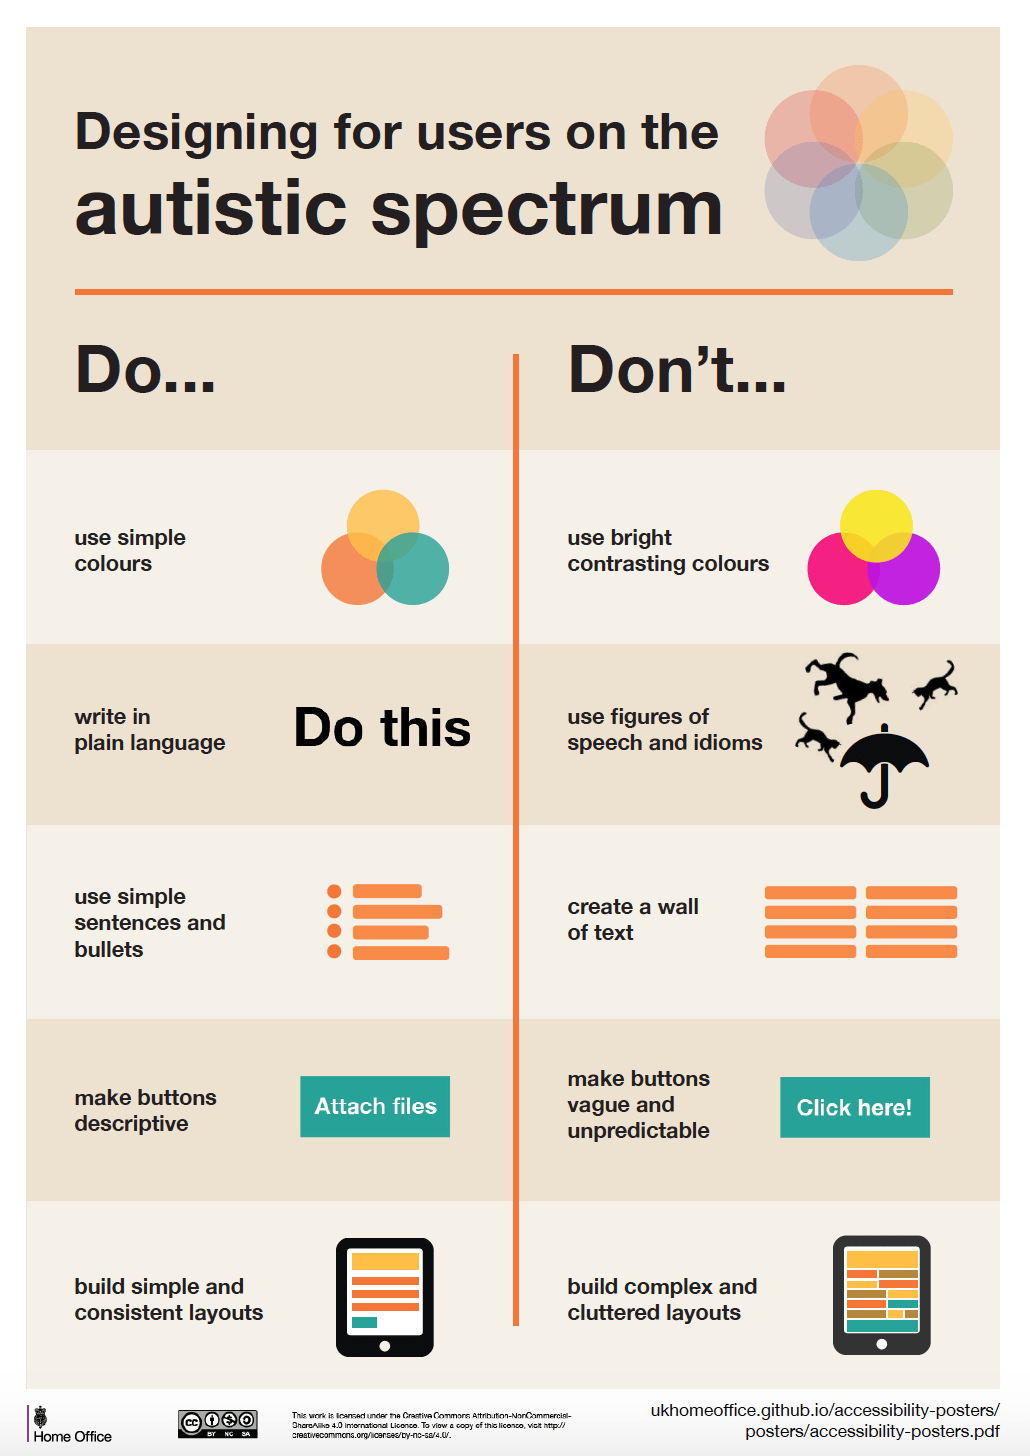 Designing for users on the autistic spectrum